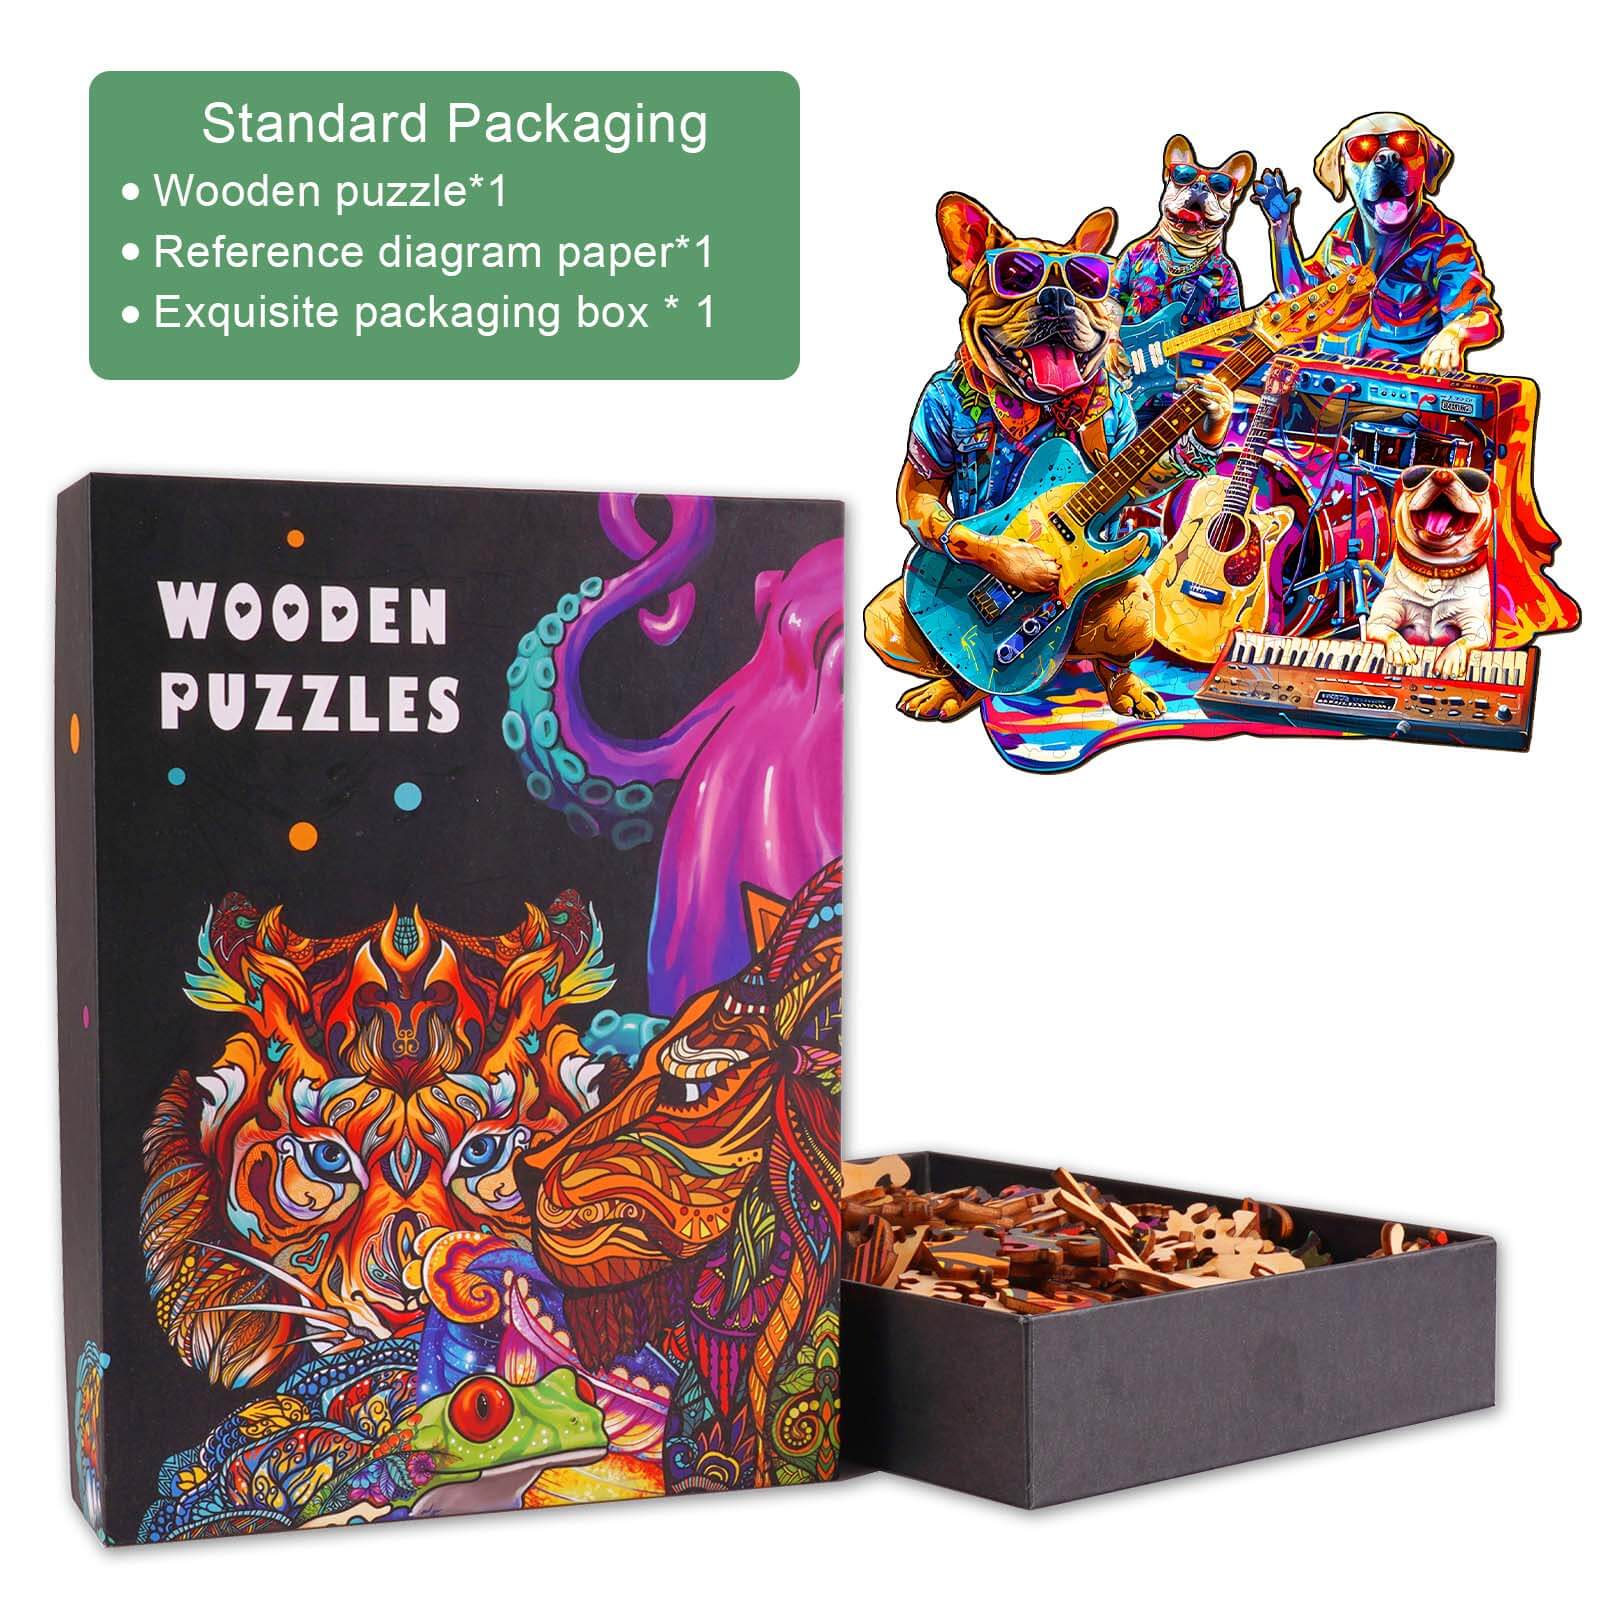 Dog Band Wooden Jigsaw Puzzle